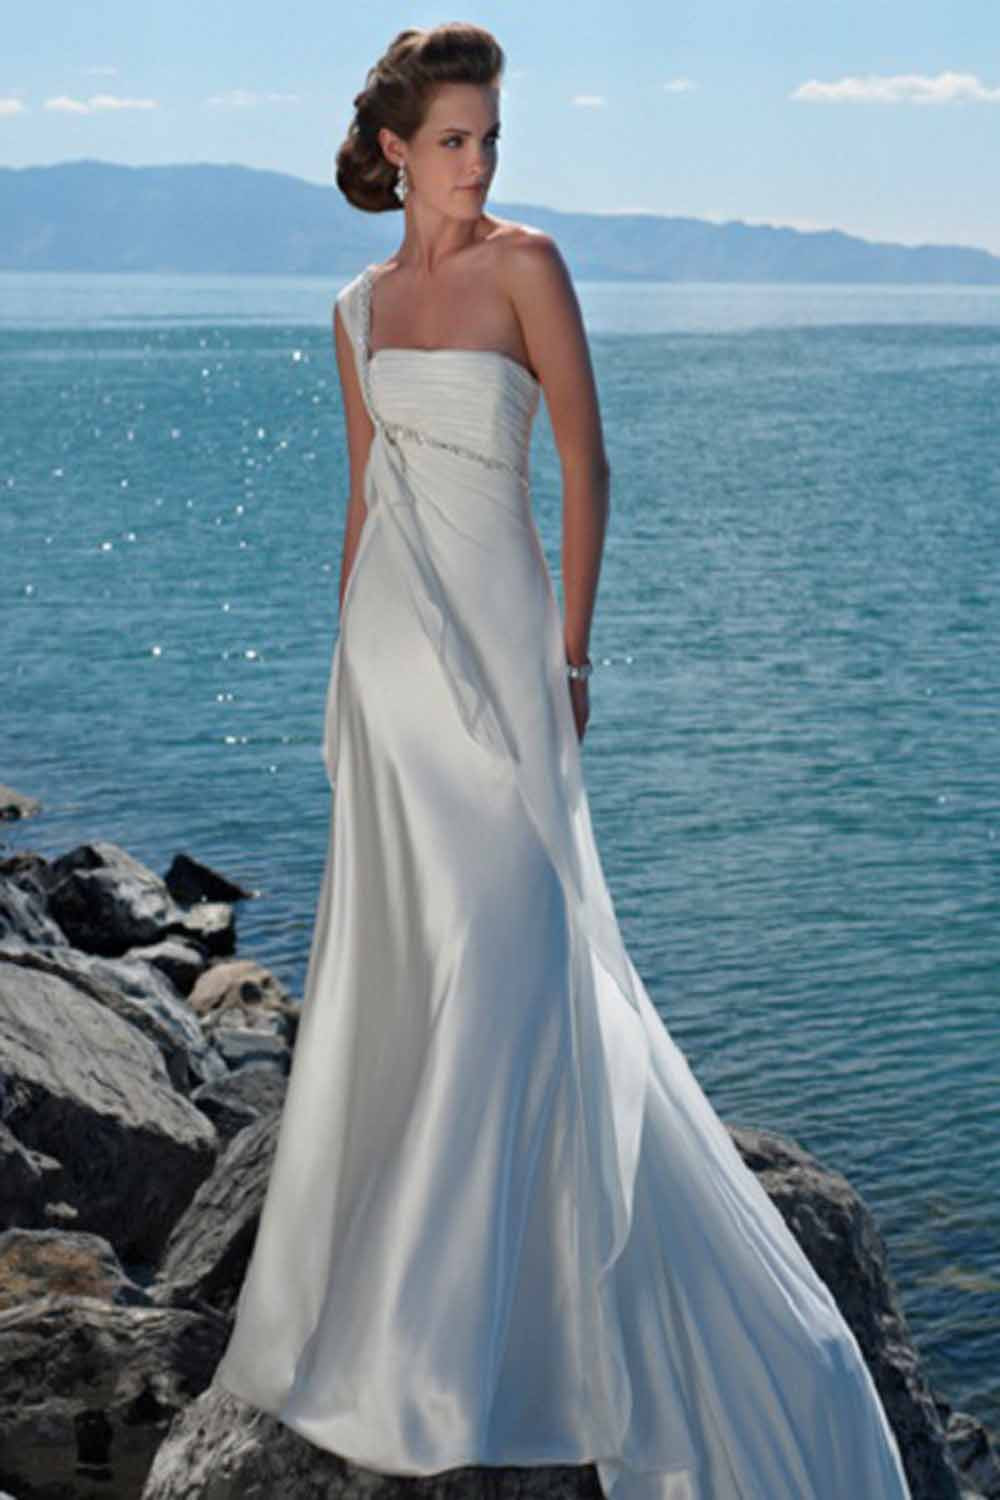 Wedding Gowns For Beach Wedding
 Different Styles of Beach Wedding Dresses